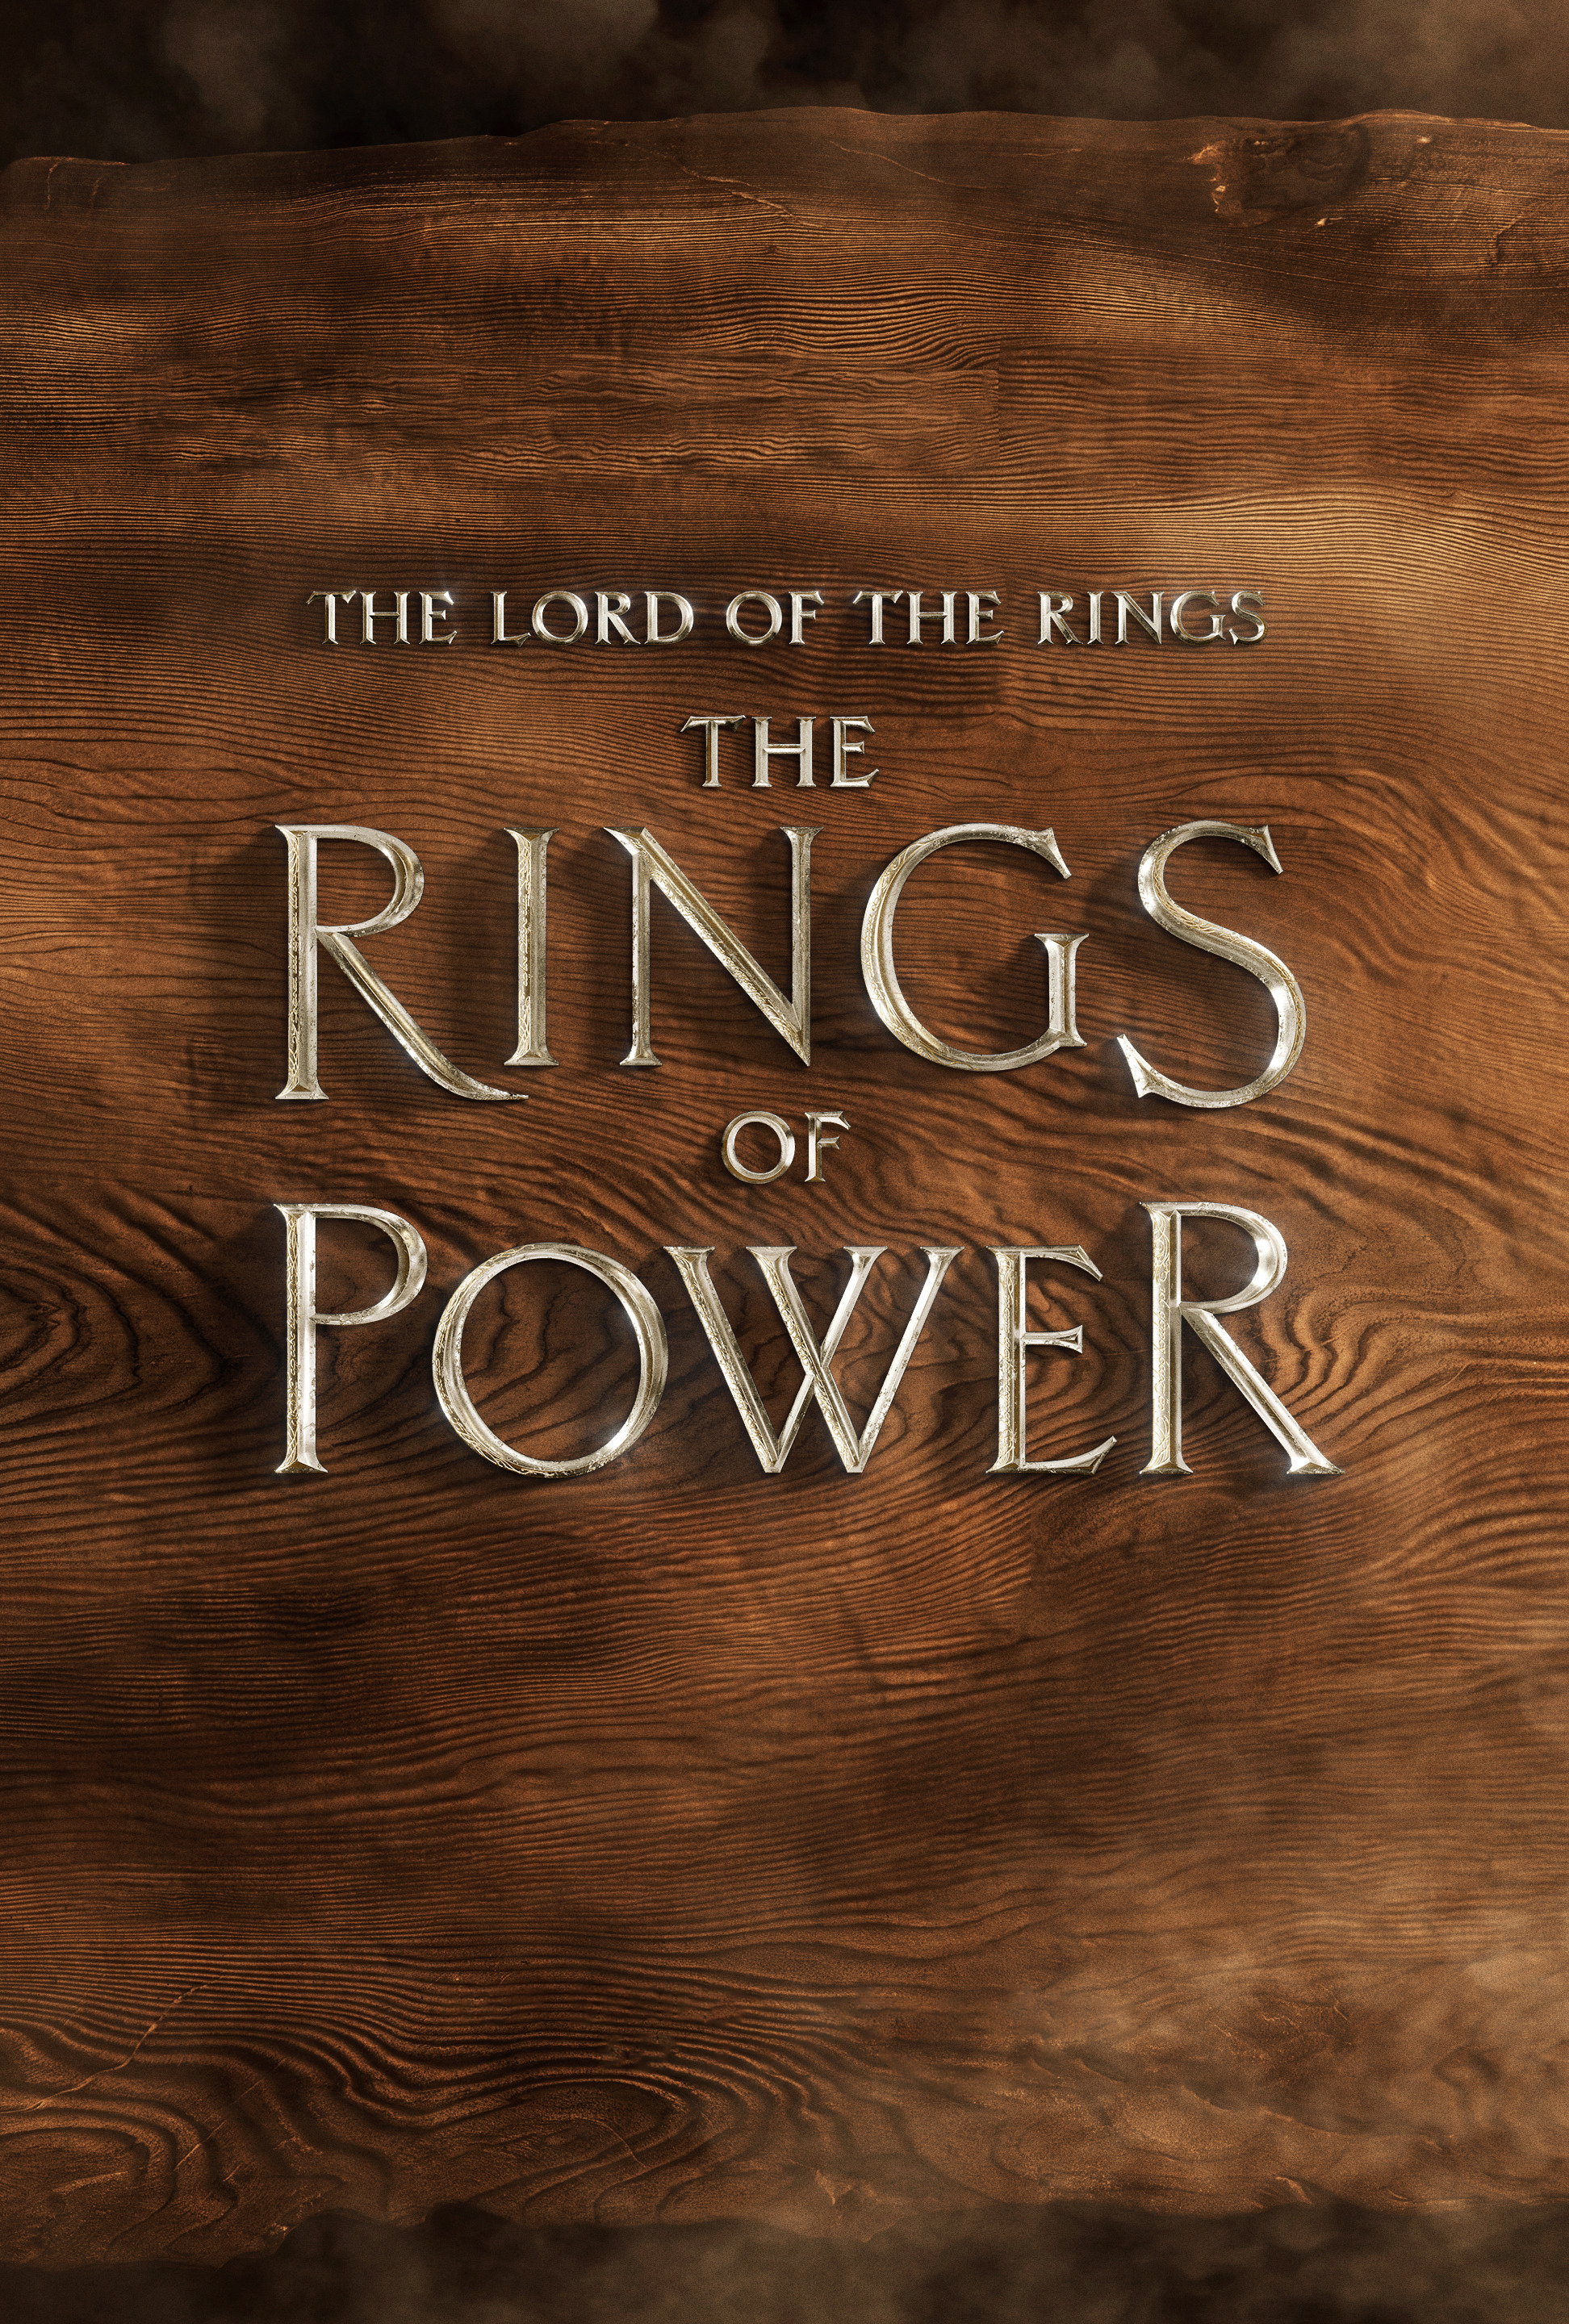 General 1944x2880 The Lord of the Rings Rings of Power TV series wooden surface text J. R. R. Tolkien portrait display